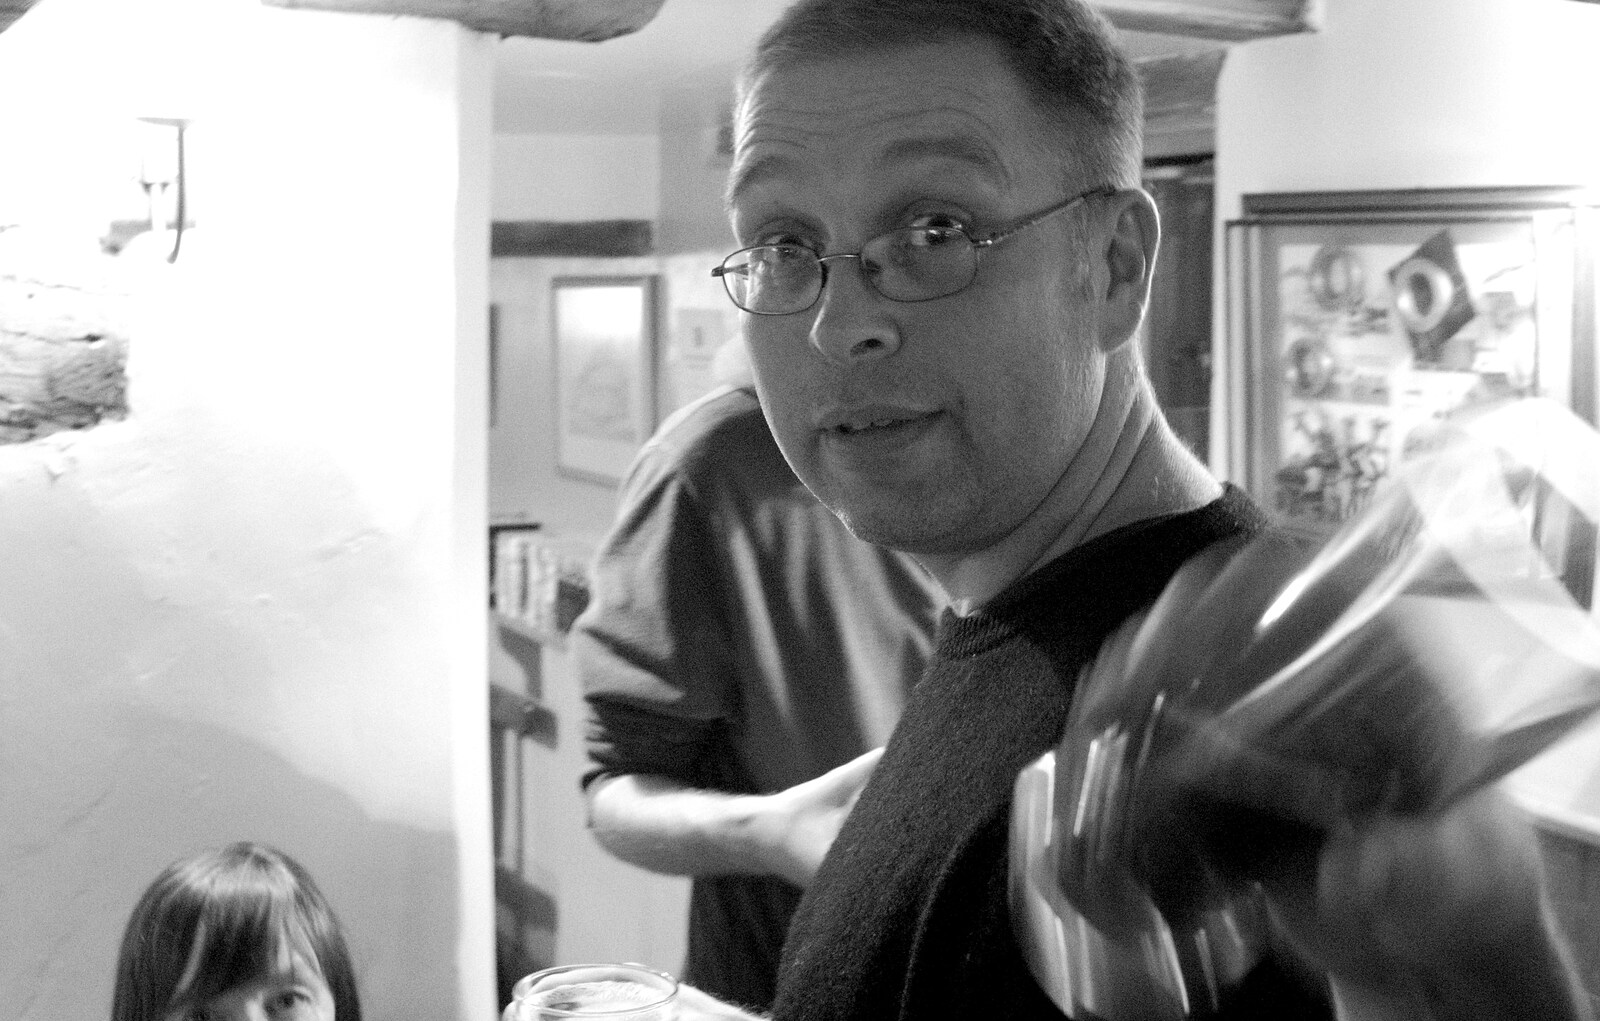 Marc in the Beaky, Occold from The Beaconsfield Arms Beer Festival, and a Rainy Day, Diss and Occold - 30th November 2012